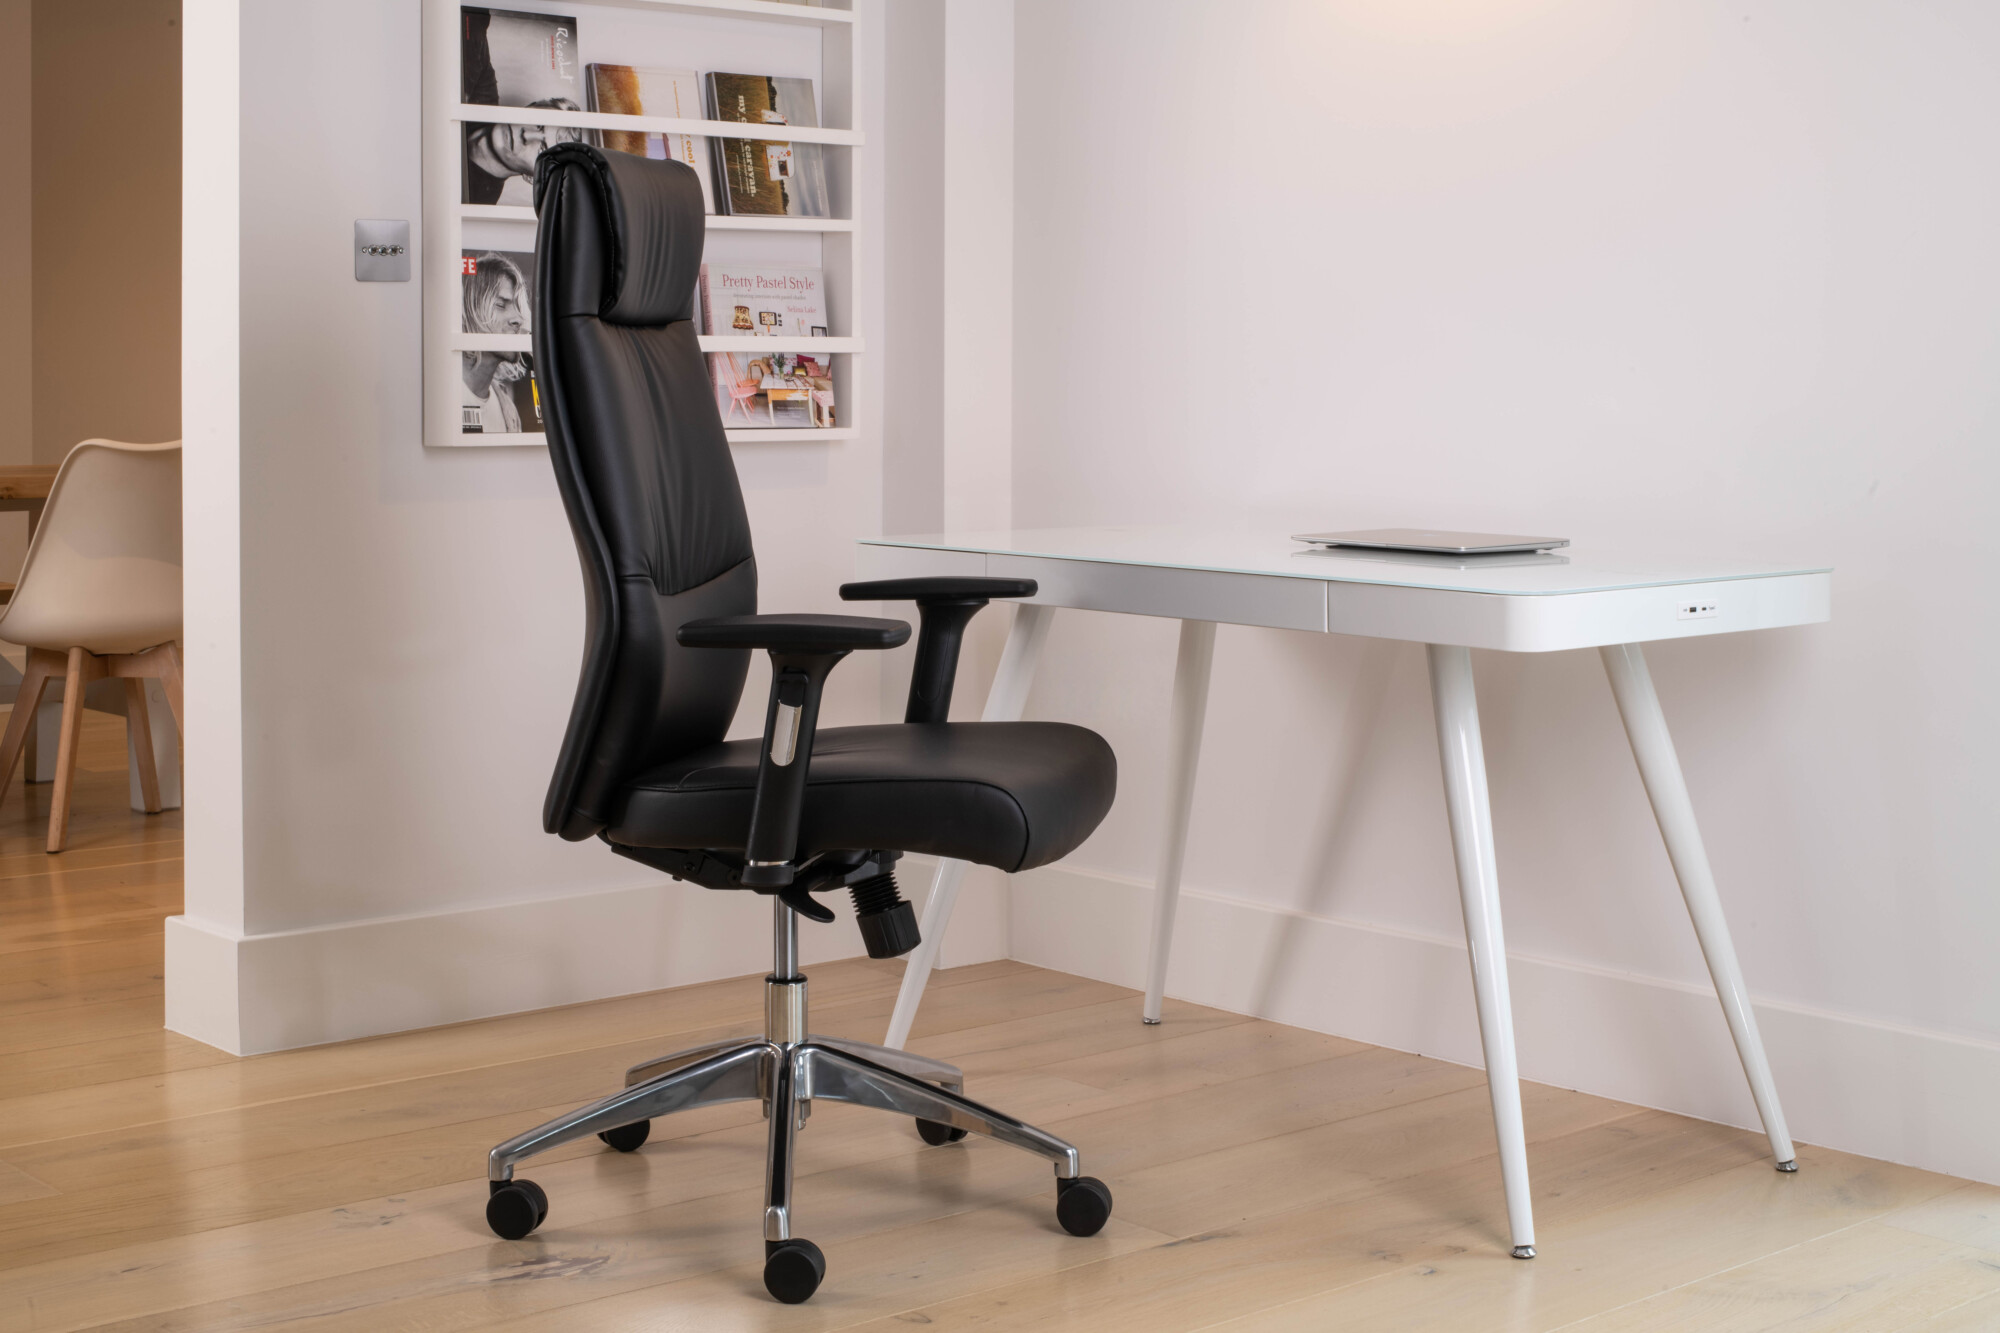 An all white smart desk paired with an all black faux leather chair. 